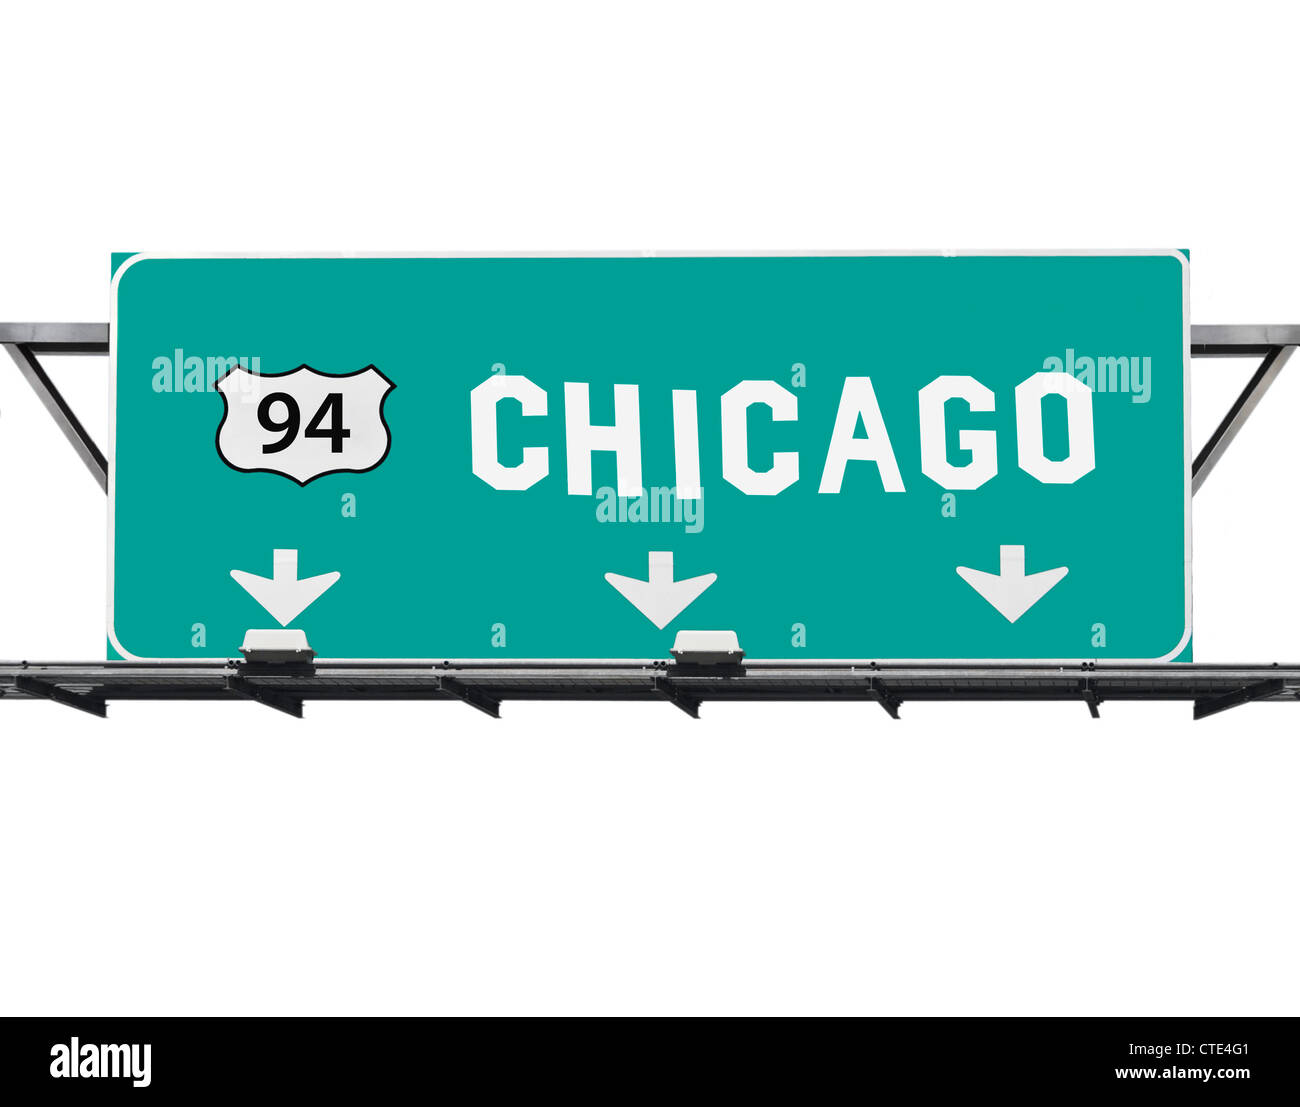 Chicago 94 freeway sign with hand made font. Stock Photo